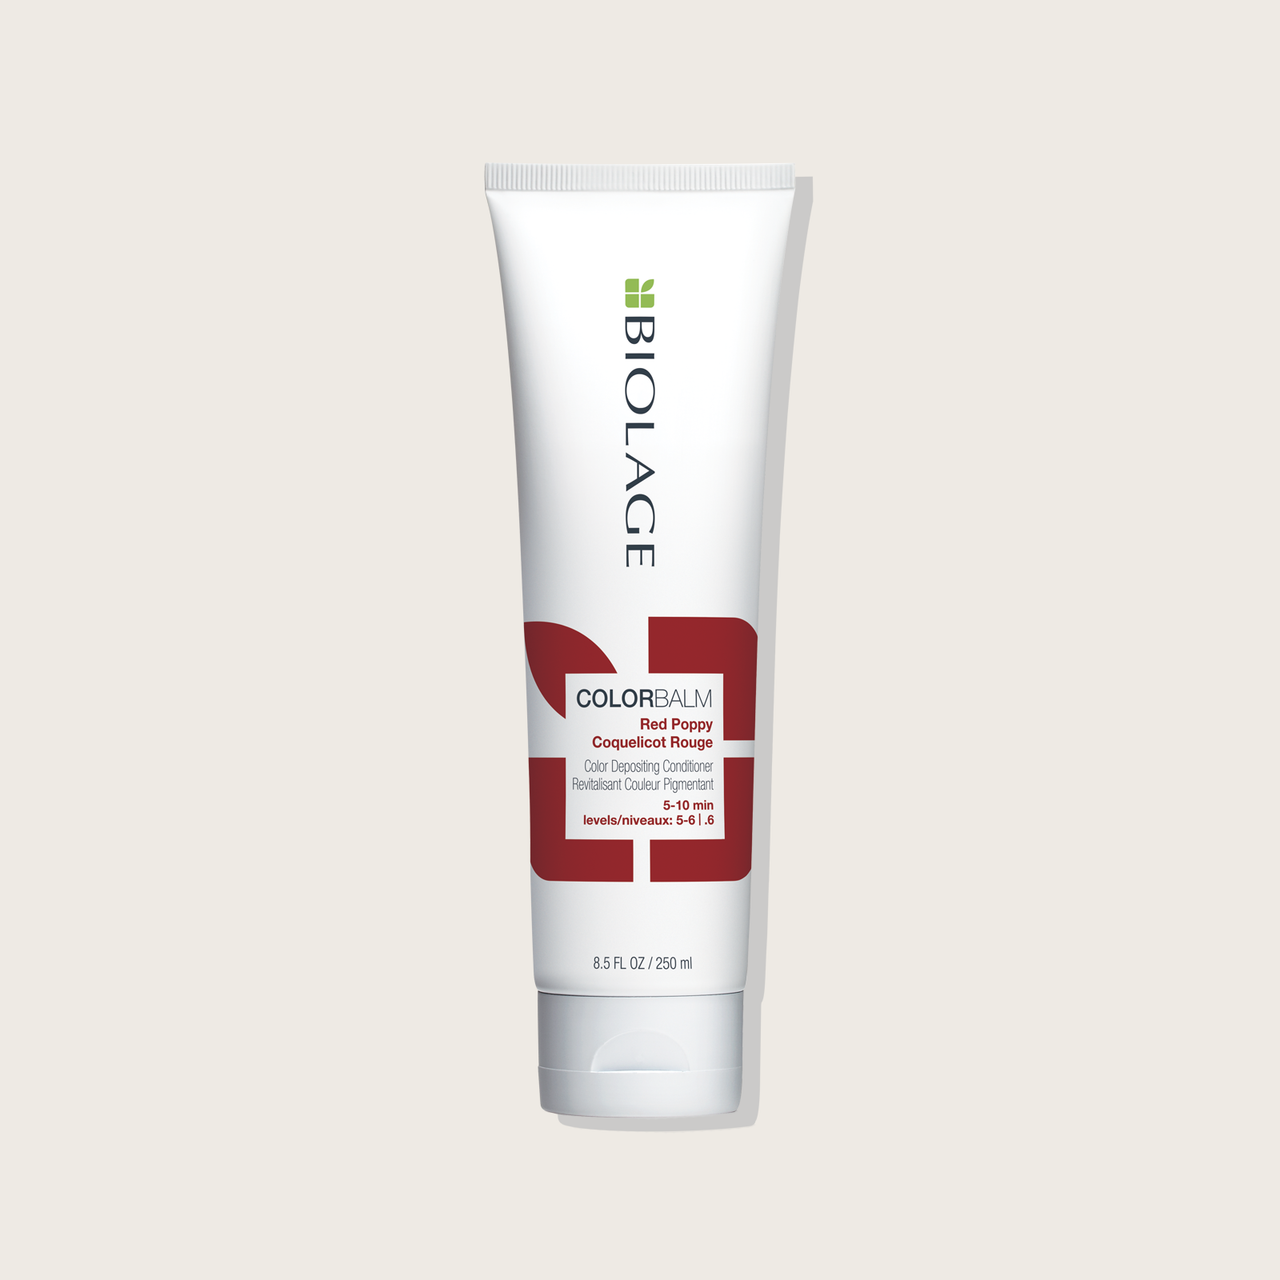 Biolage COLORBALM COLOR DEPOSITING CONDITIONER RED POPPY 